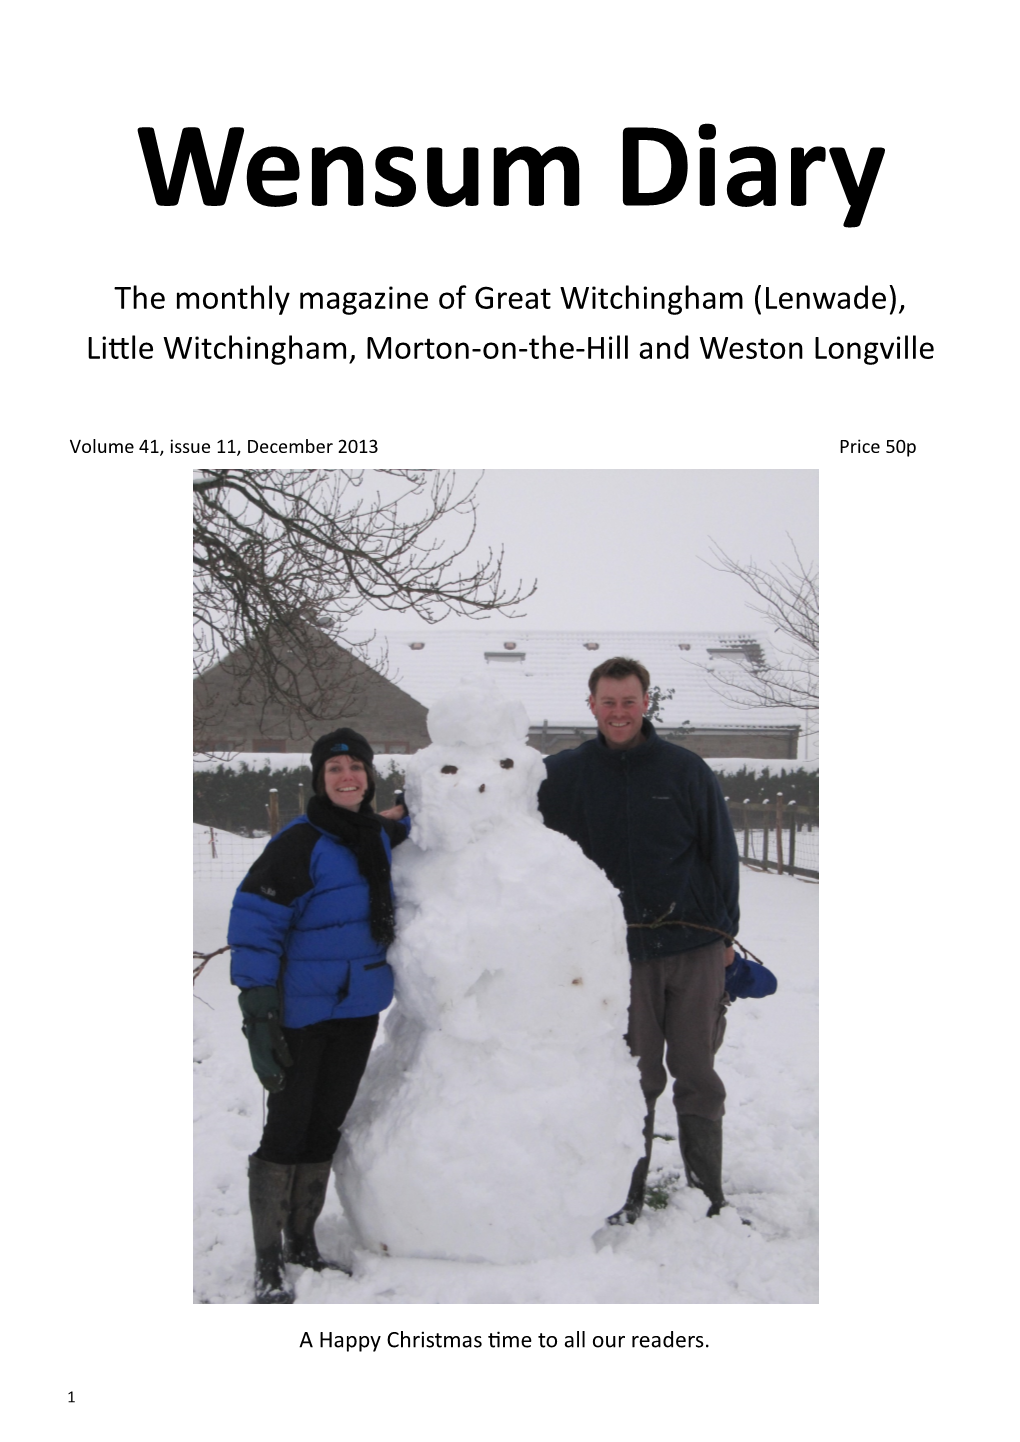 The Monthly Magazine of Great Witchingham (Lenwade), Little Witchingham, Morton-On-The-Hill and Weston Longville